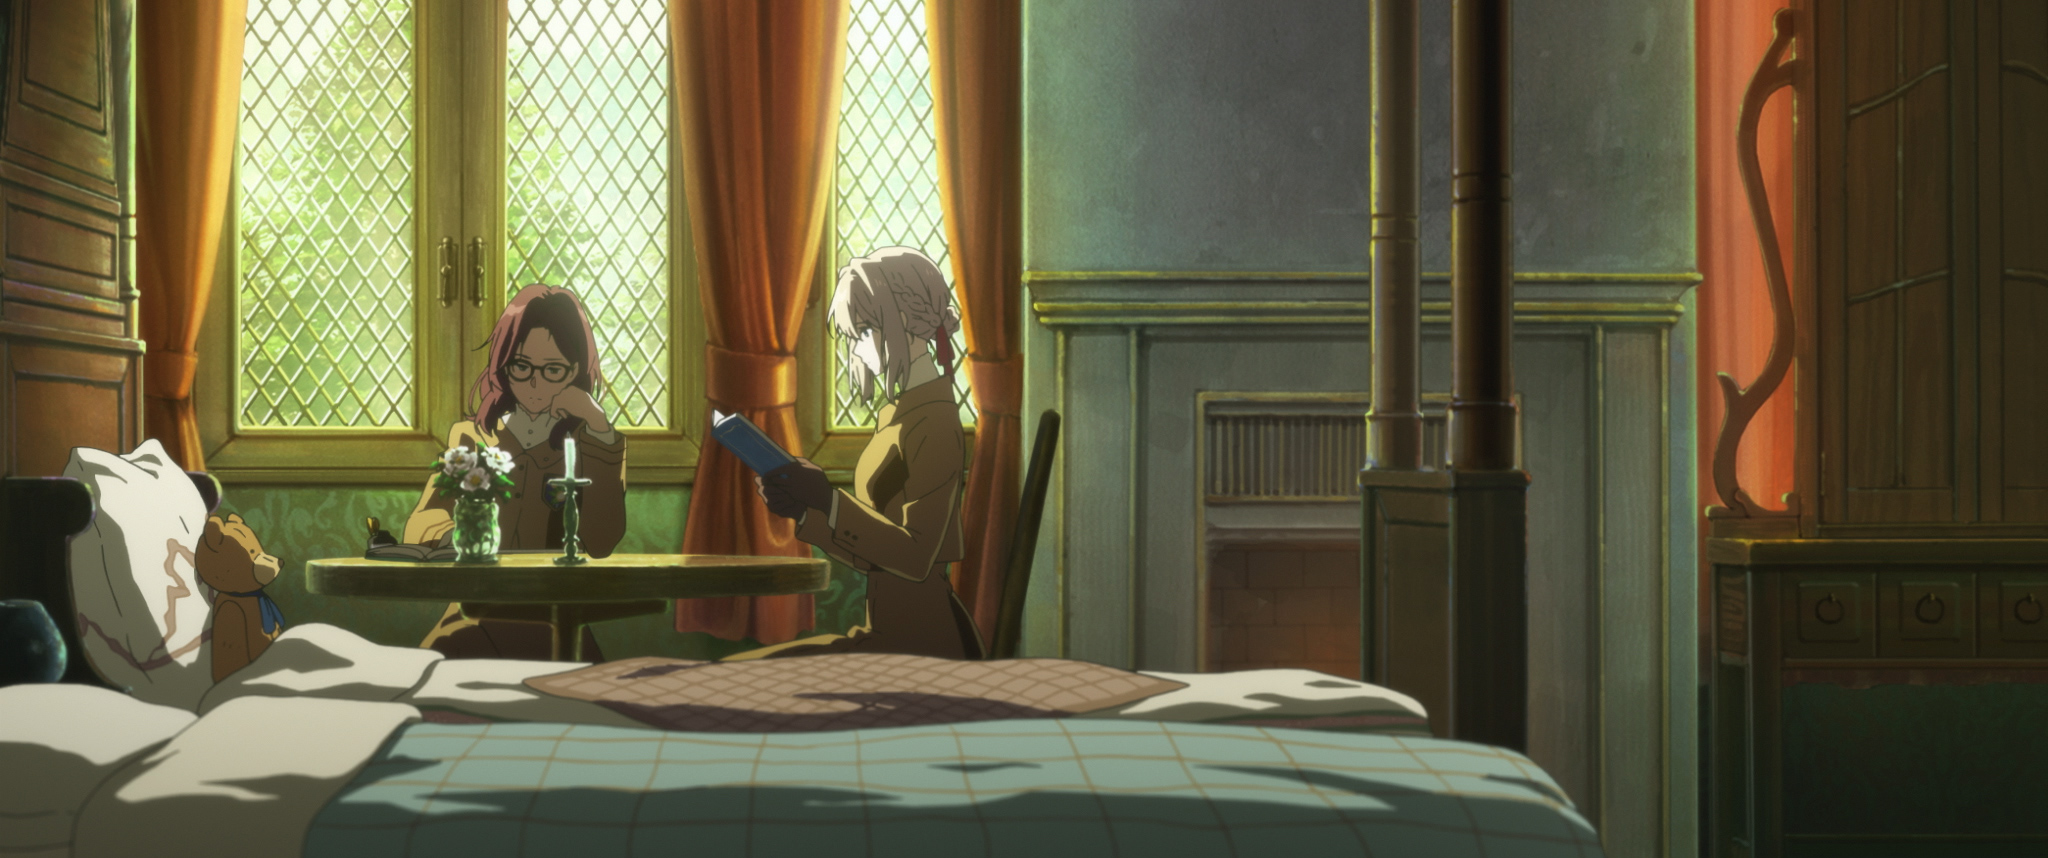 violet evergarden eternity and the auto memory doll download free